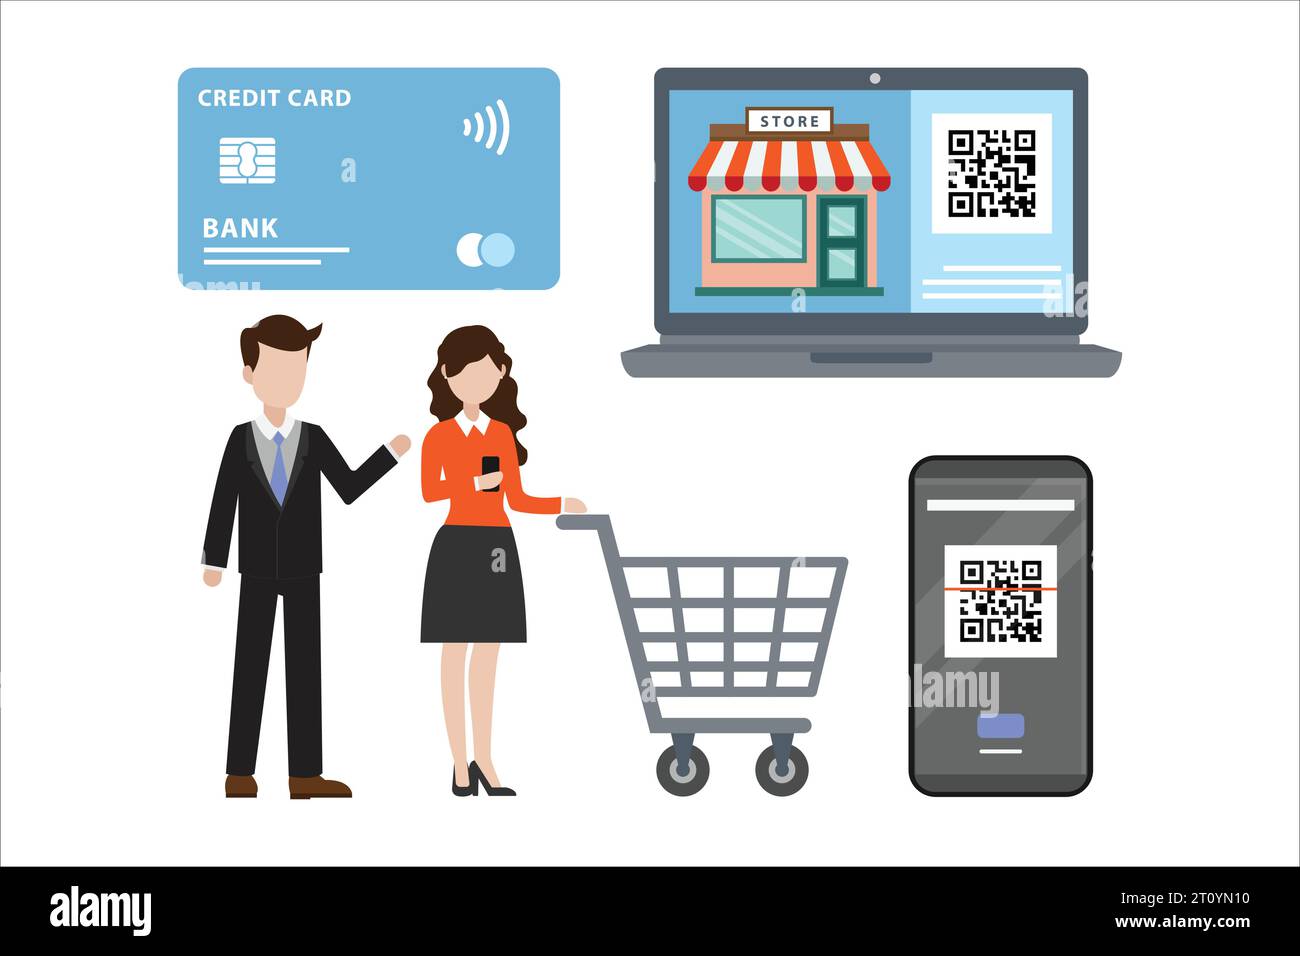 contactless payment illustration of man and woman shopping online with smart phone Stock Vector